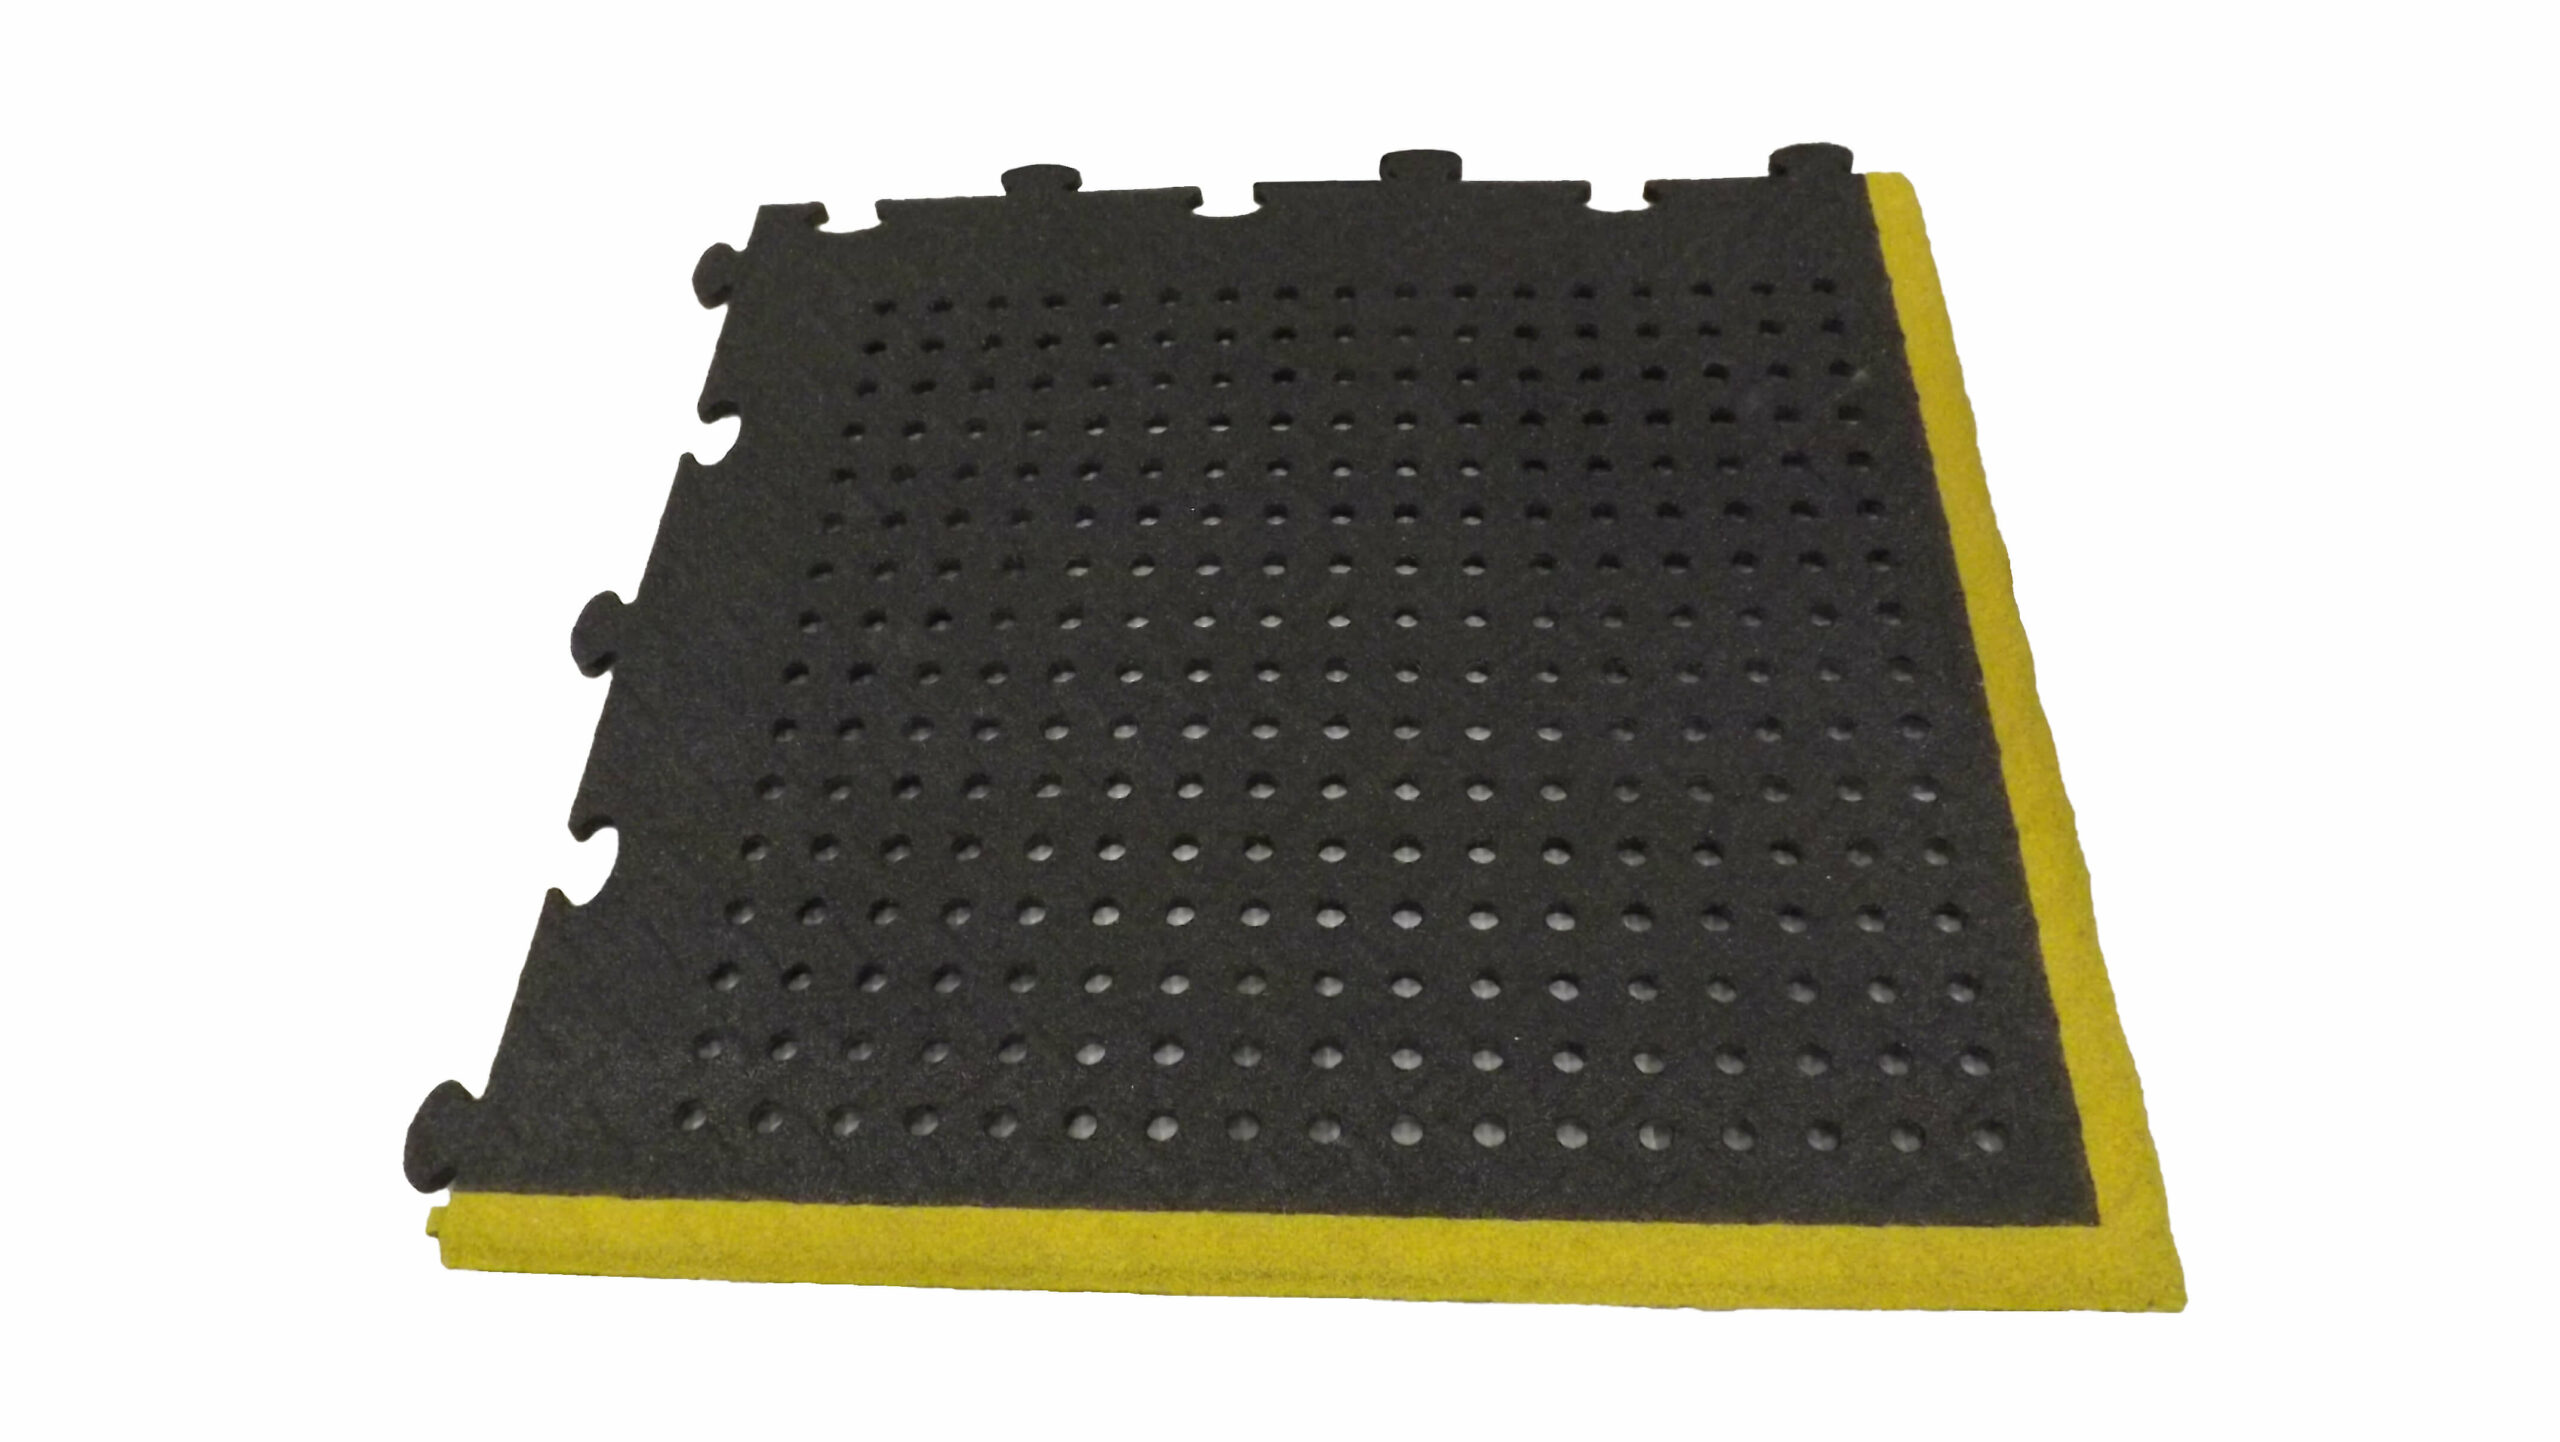 Heavyweight two tone yellow and black industrial mat